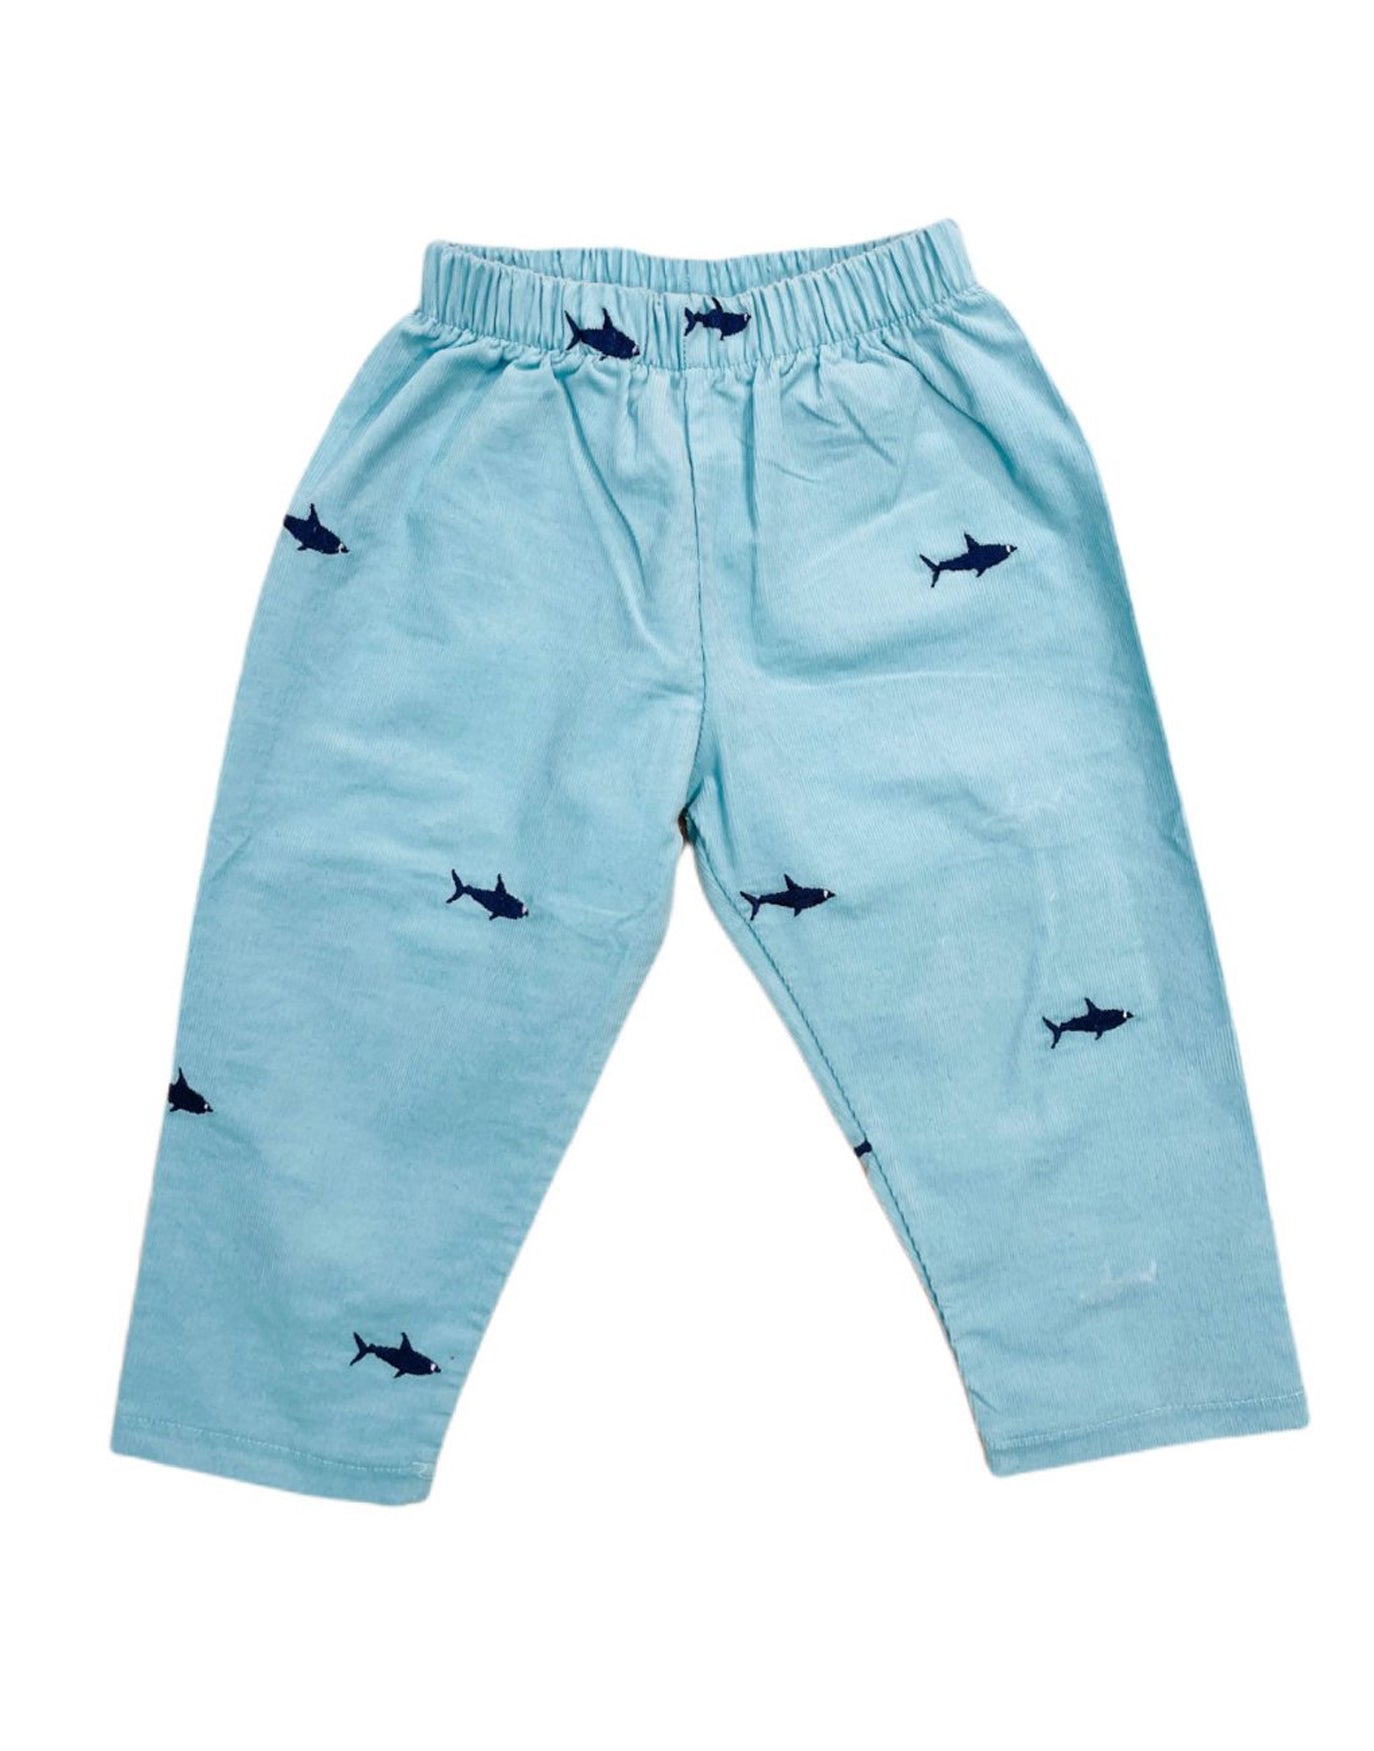 Turquoise Corduroy Pants with Navy Sharks